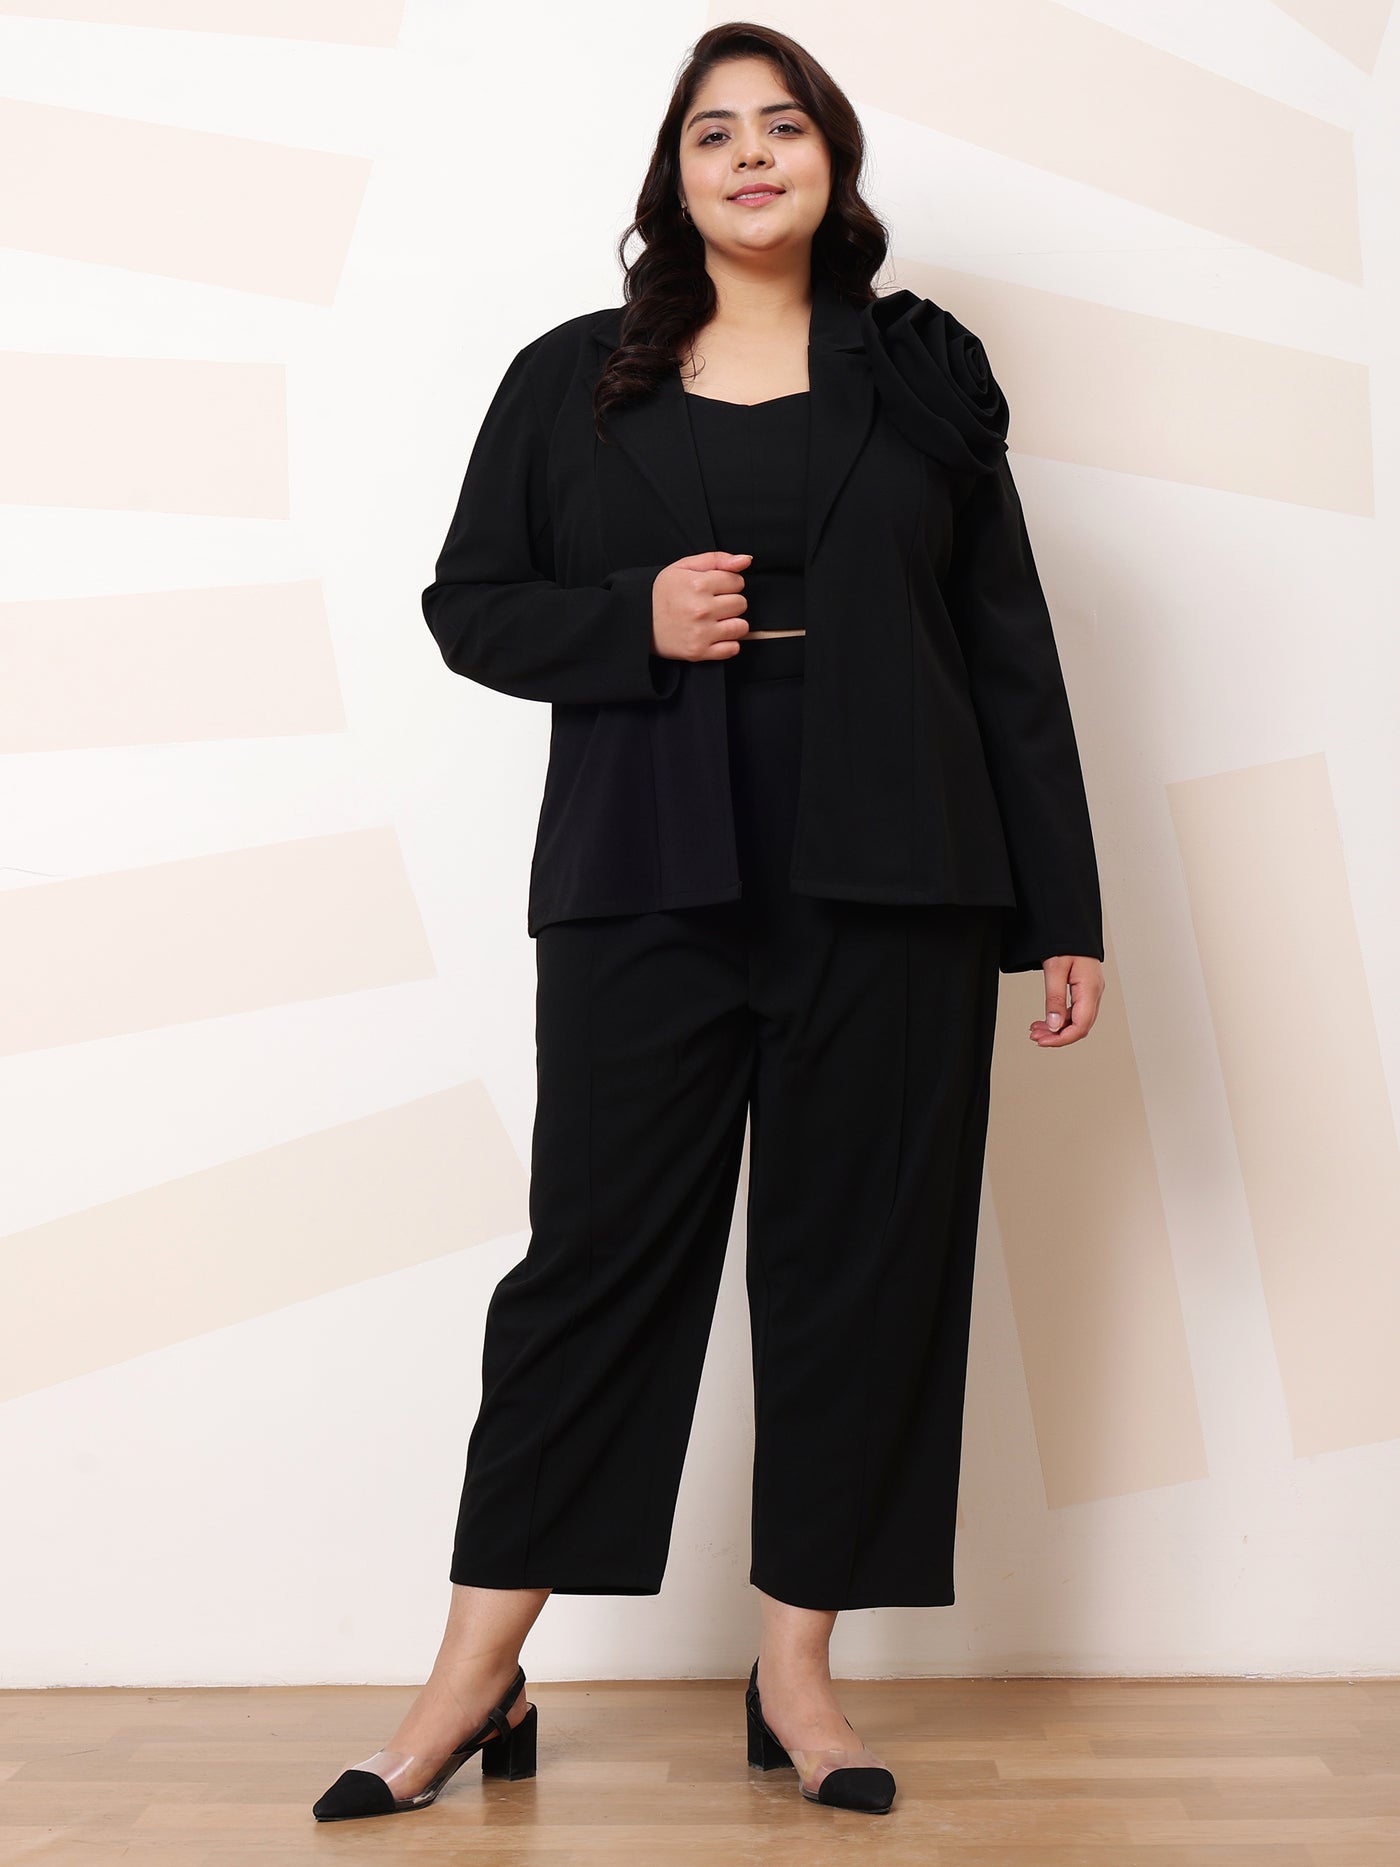 Athena Ample Black Plus Size Long Sleeves Top and Blazer With Trouser Co-Ords Set